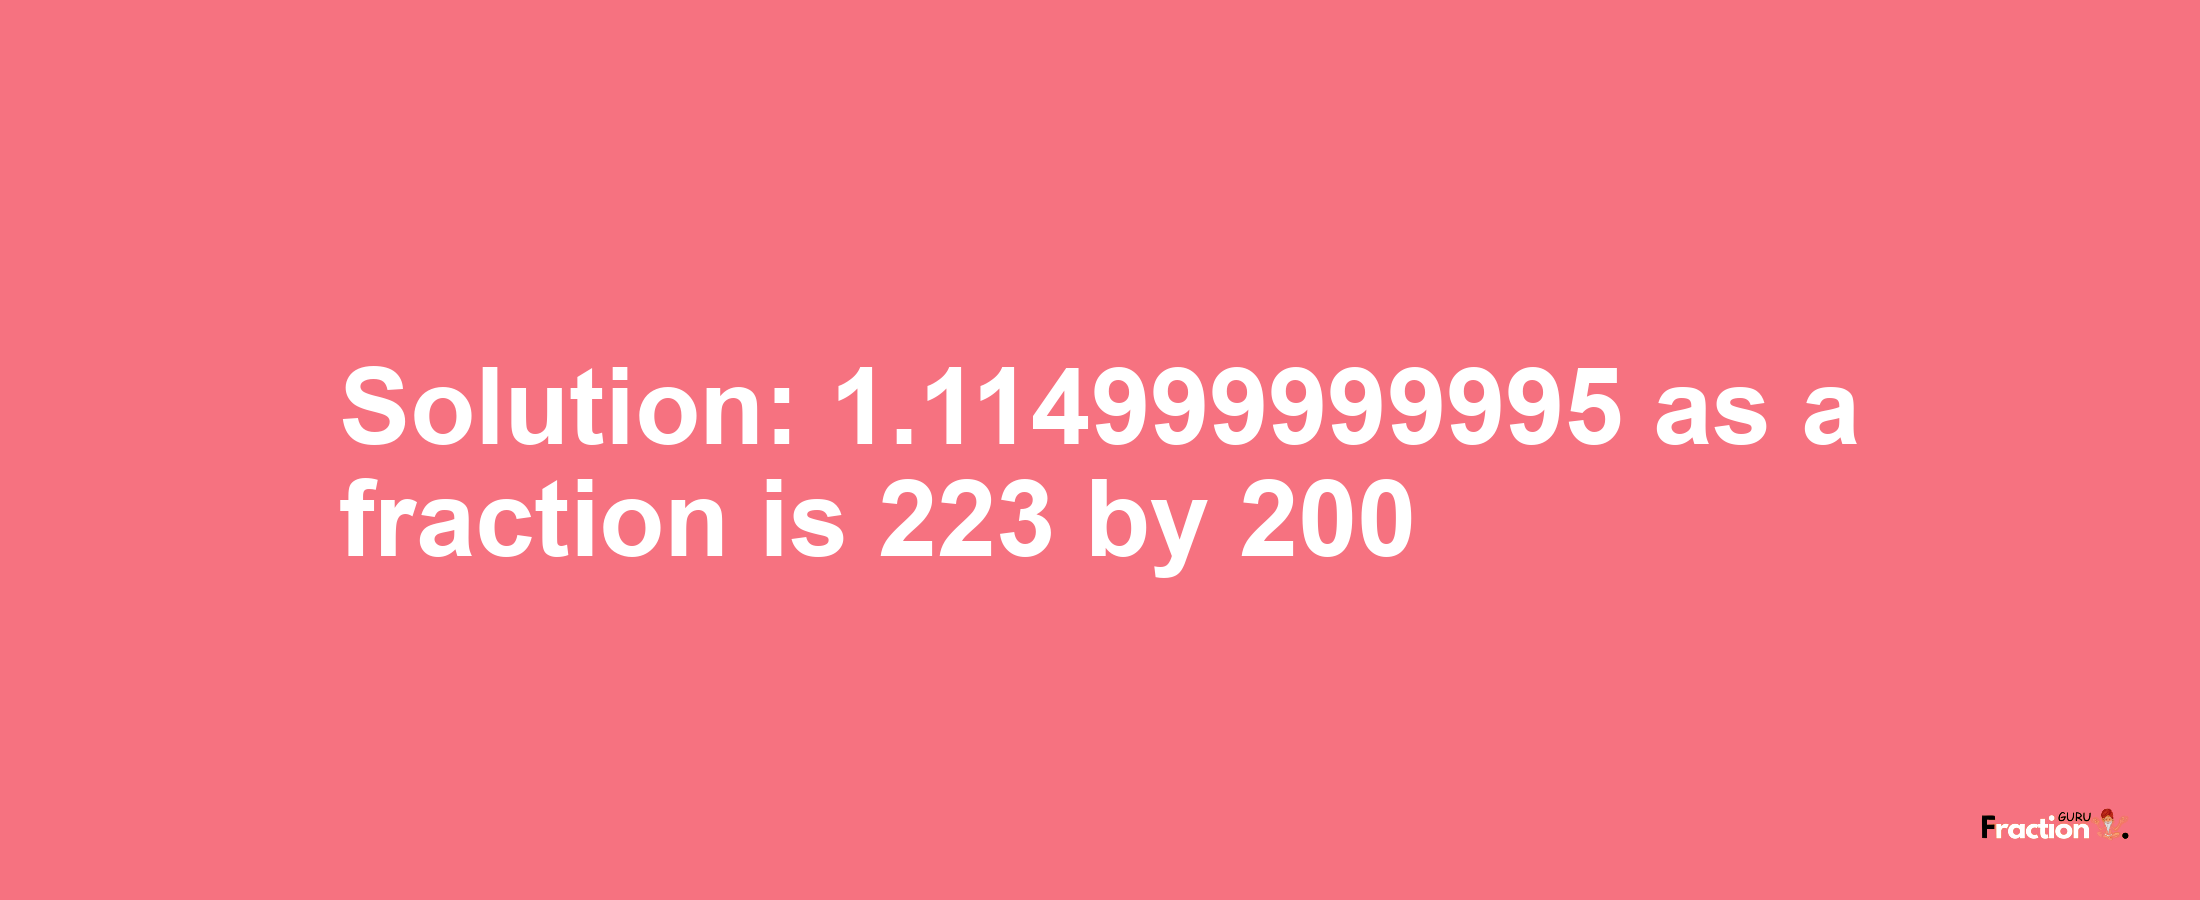 Solution:1.114999999995 as a fraction is 223/200